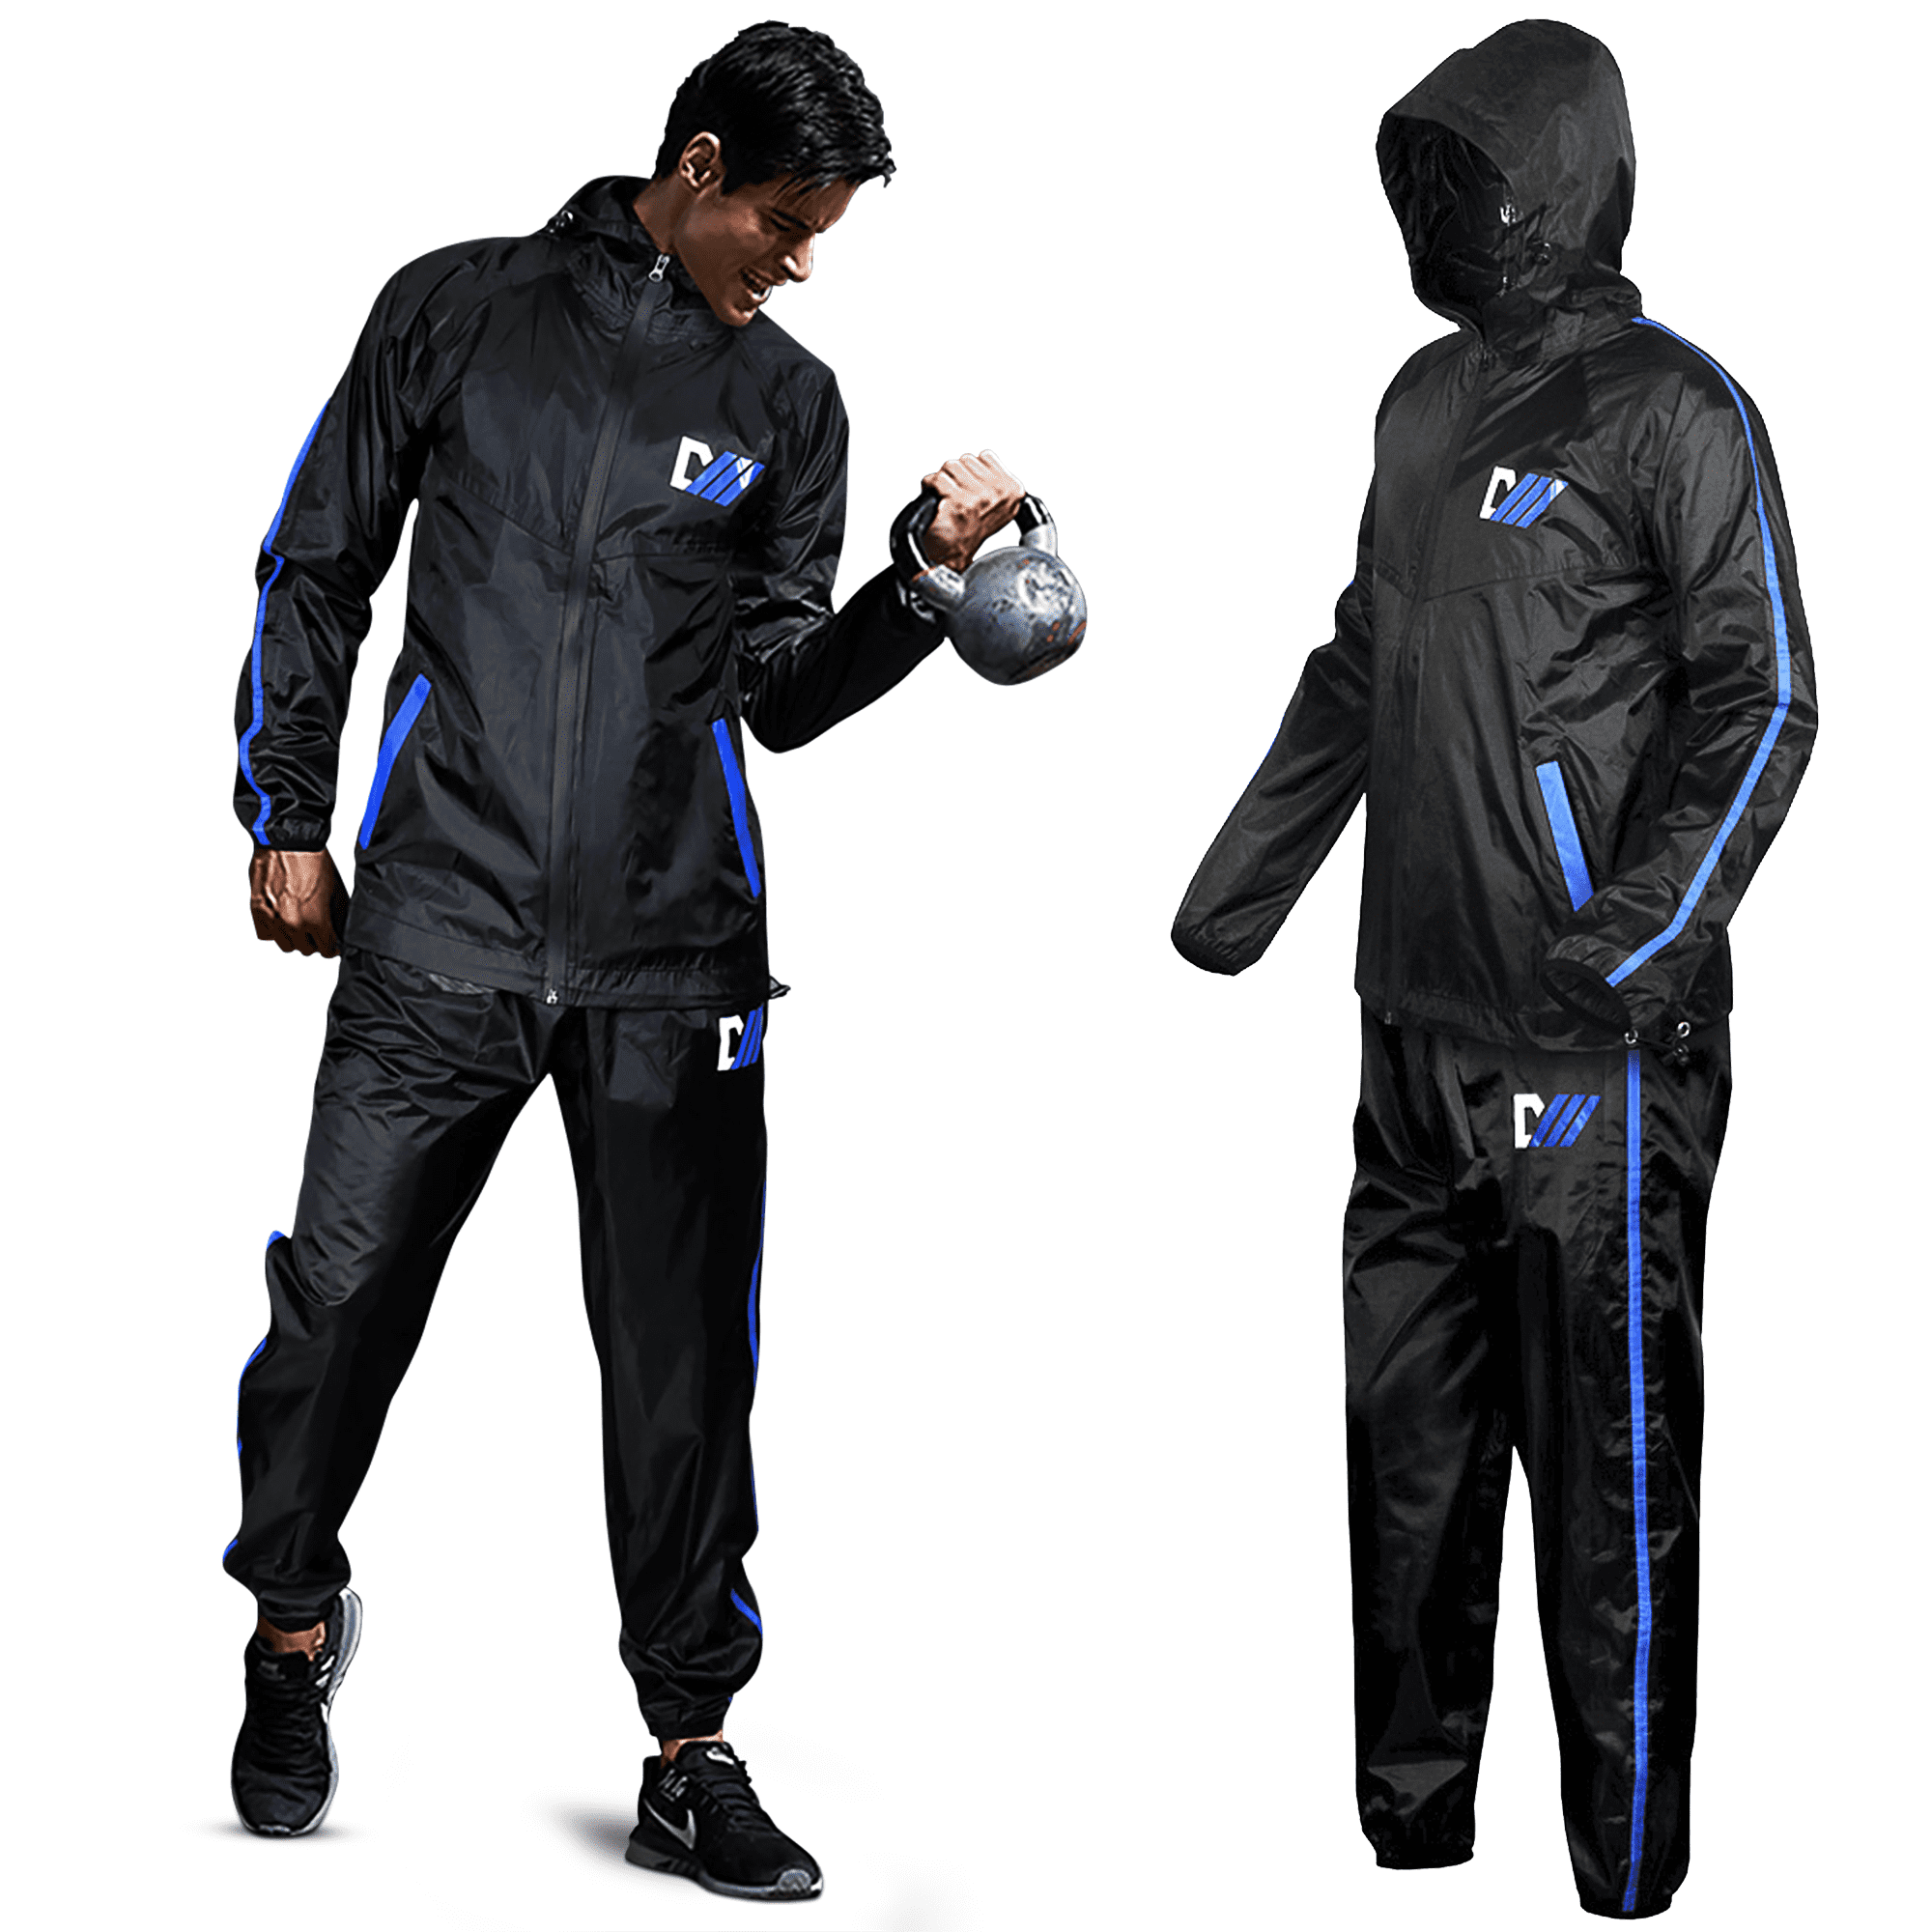 Athletic Adult Sauna Suit M/L Fits Waist Sizes 30" 38" $17.87 FREE SHIPPING 